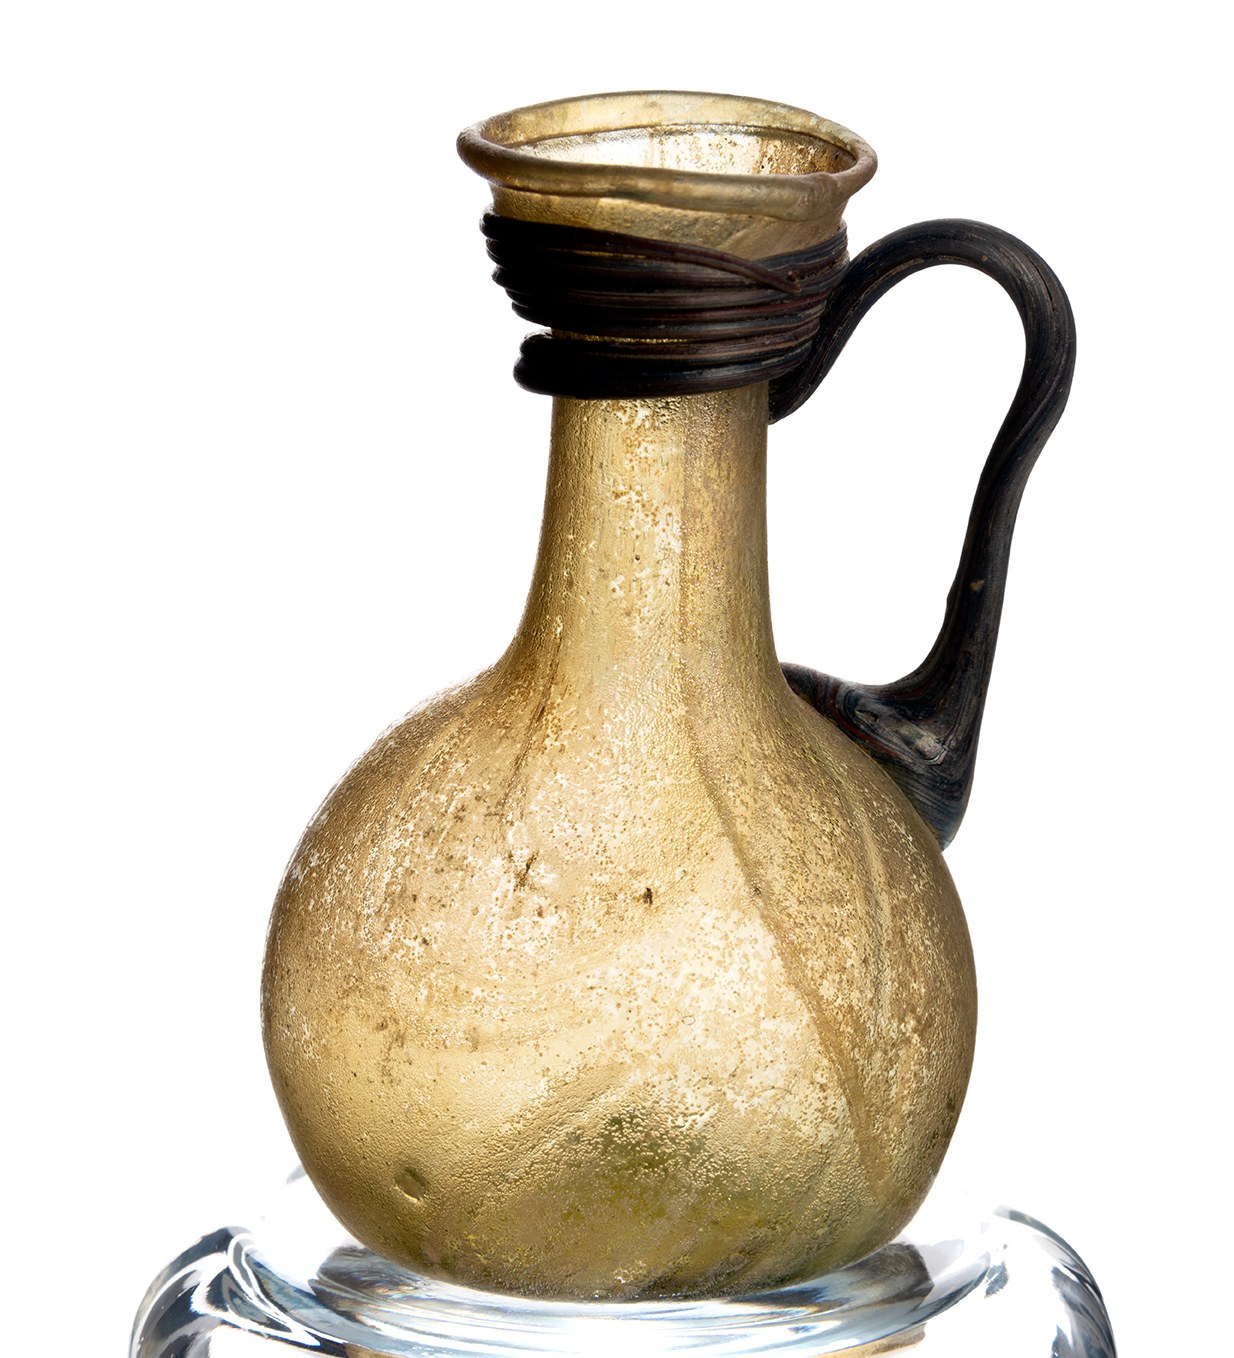 A glass jug, part of the collection at Paisley Museum